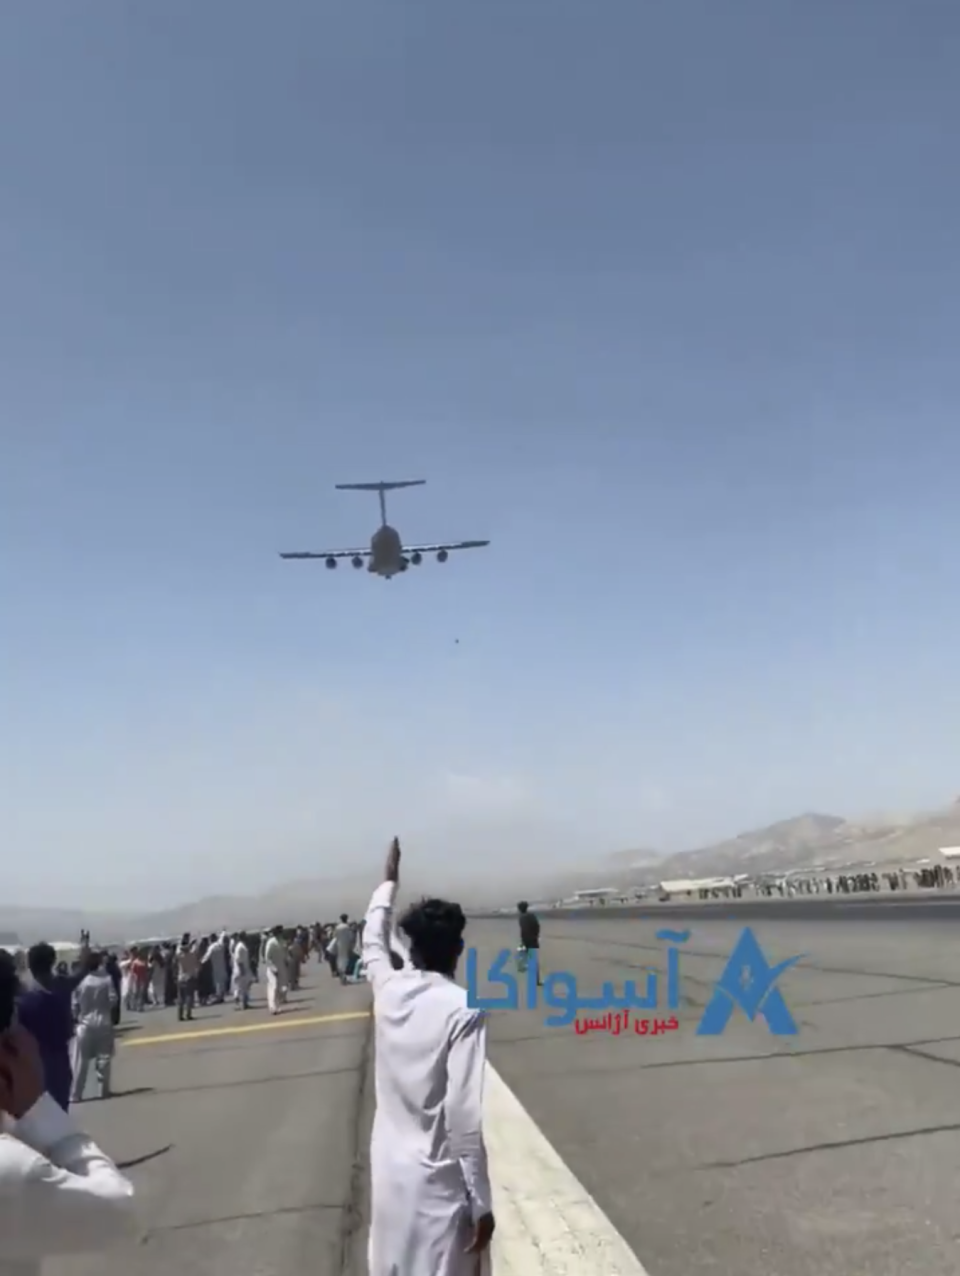 Person falls to their death from airborne C-17 plane, which they had clung to as it departed from the Kabul, Afghanistan, airport